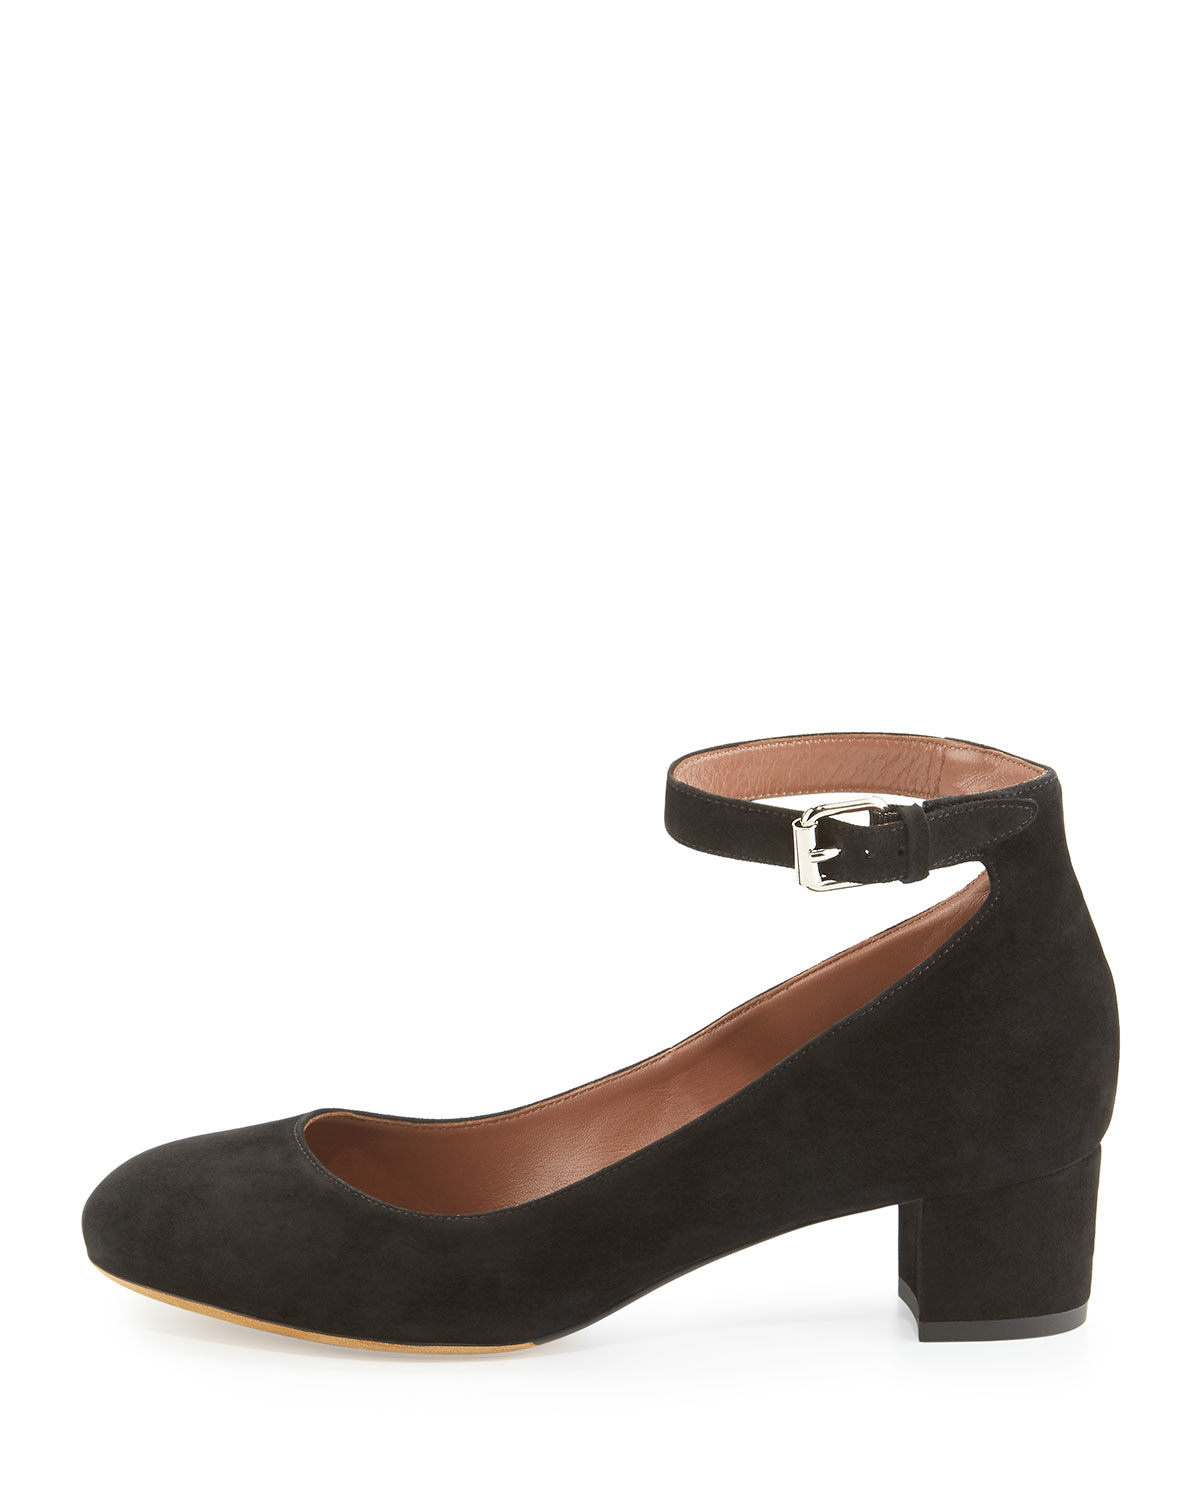 Tabitha Simmons Martha Suede Ankle-strap Pump in Black - Lyst